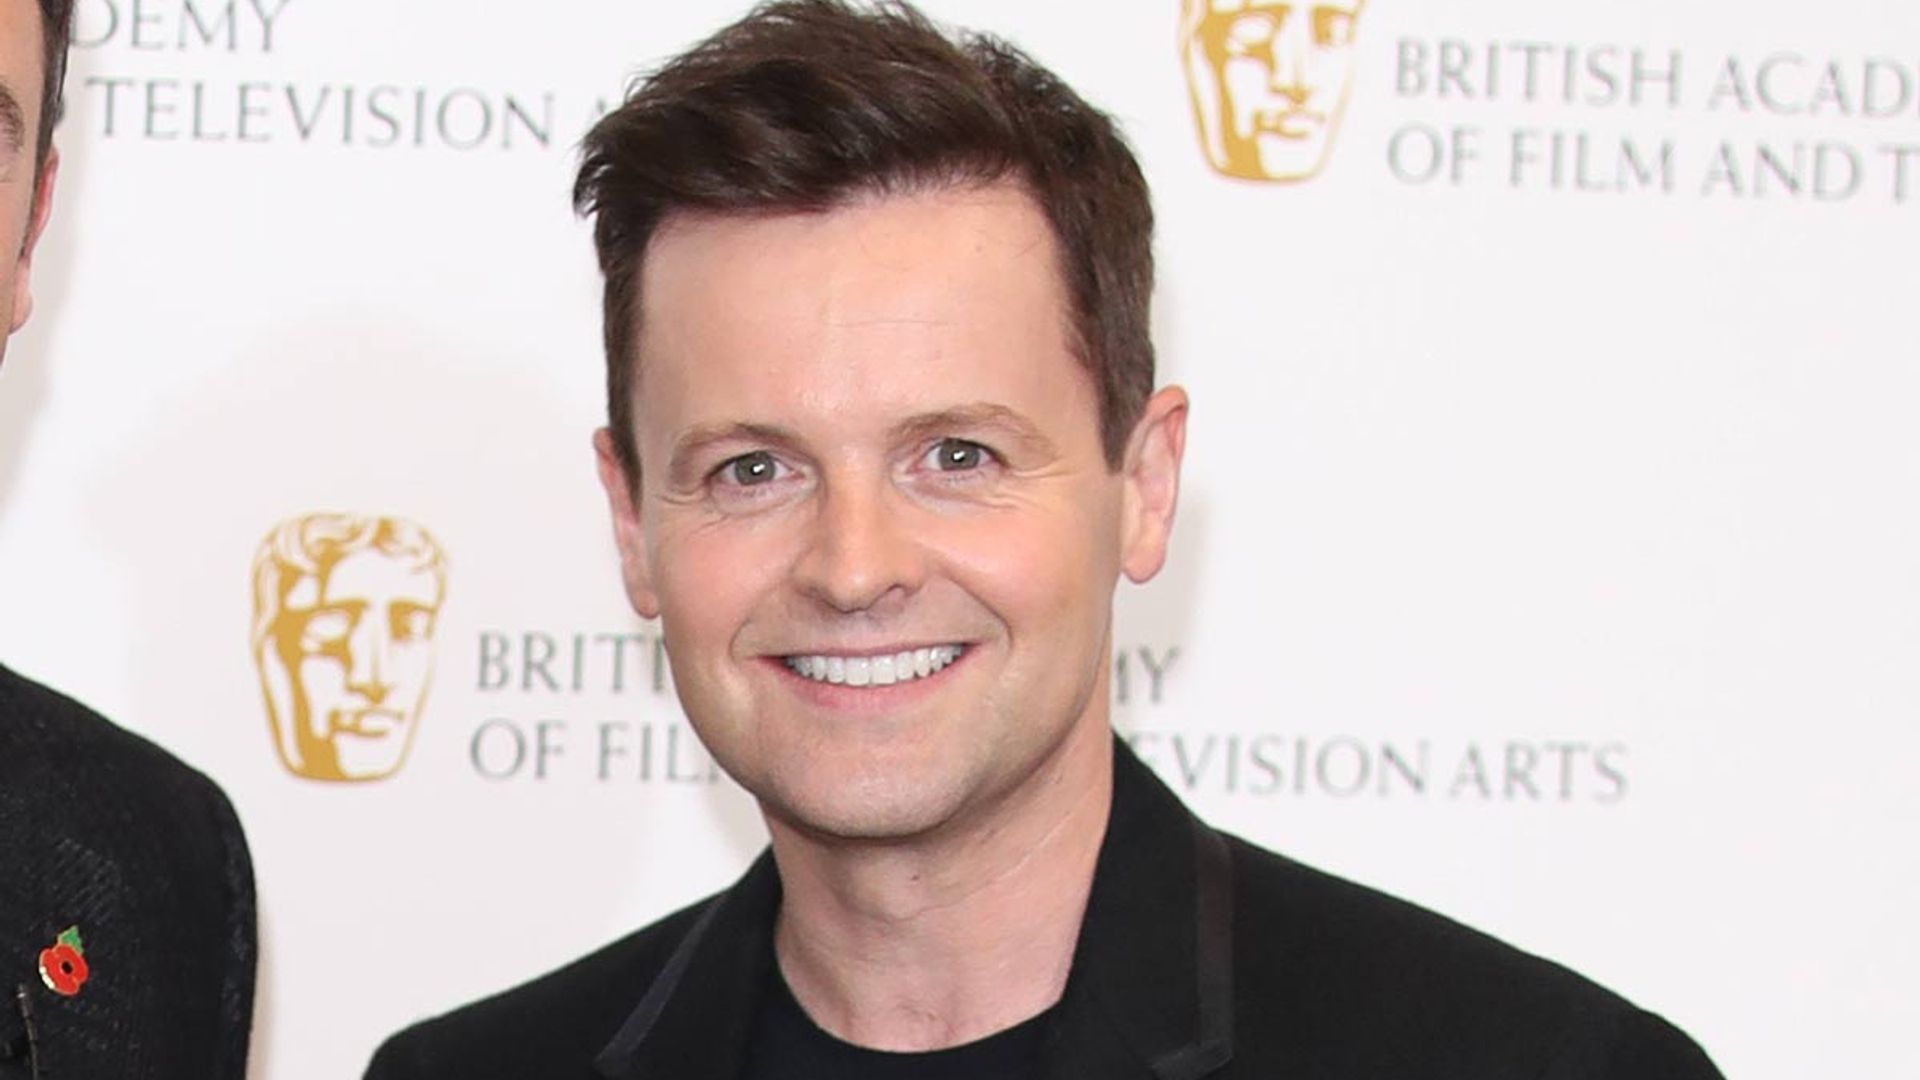 Everything you need to know about Declan Donnelly's family